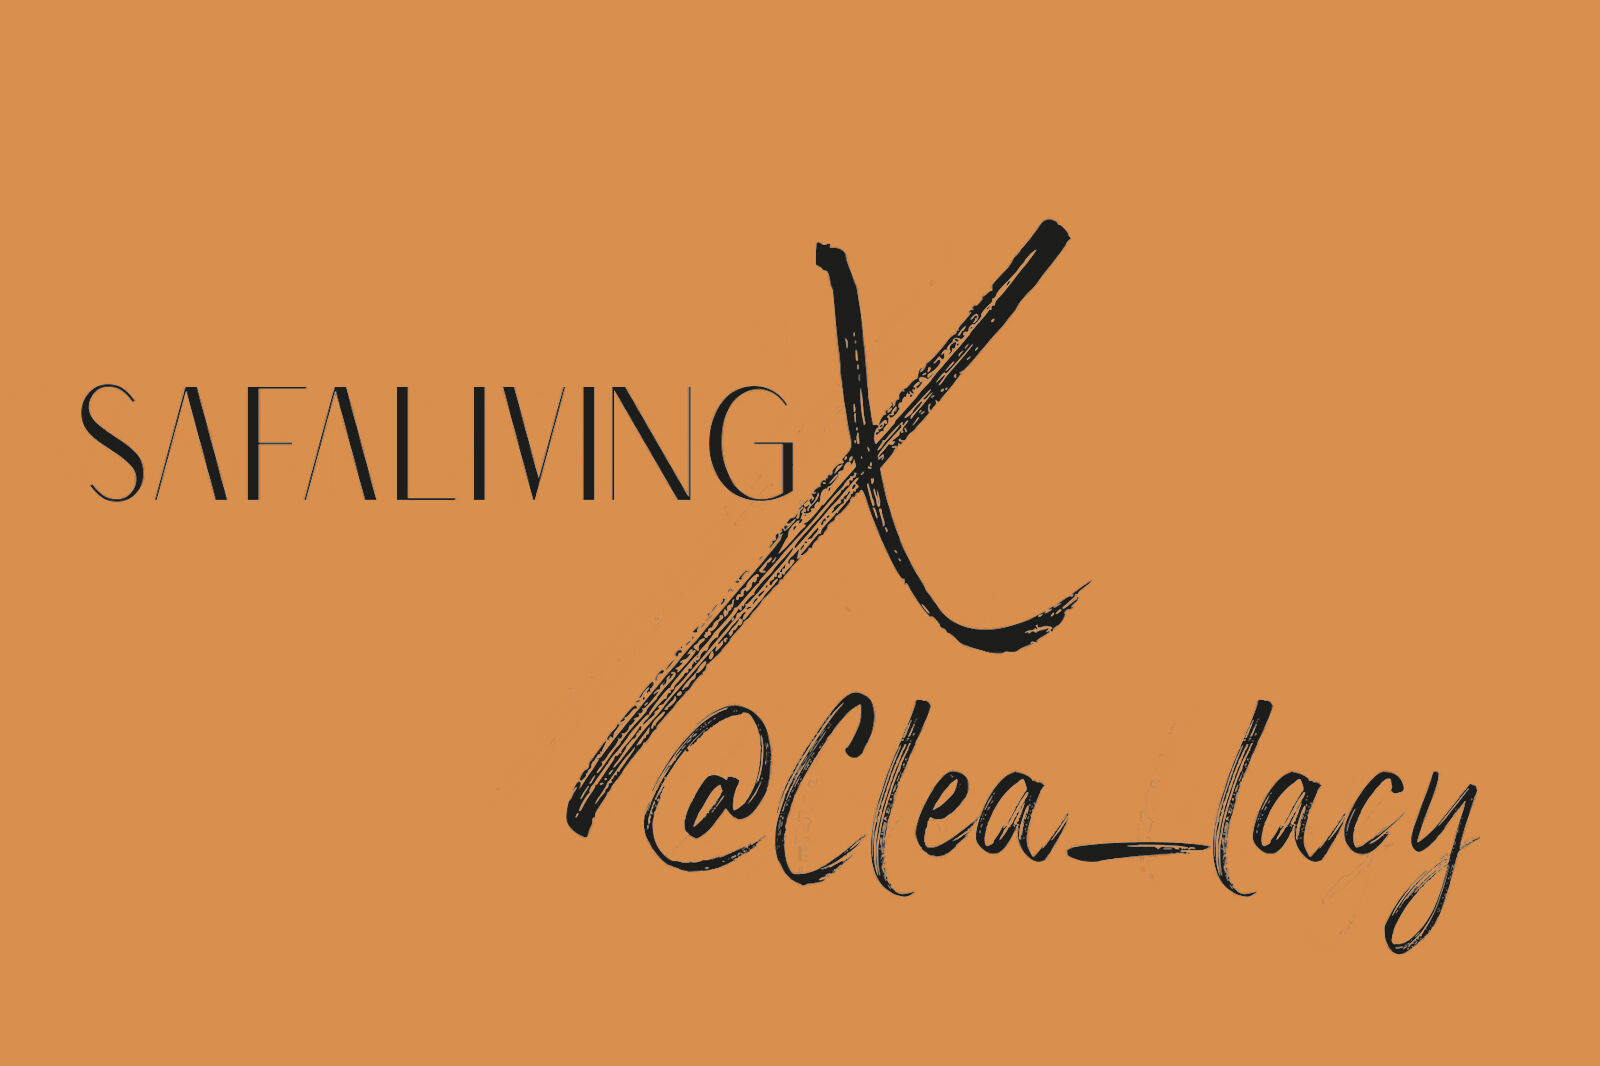 safaliving x clea lacy